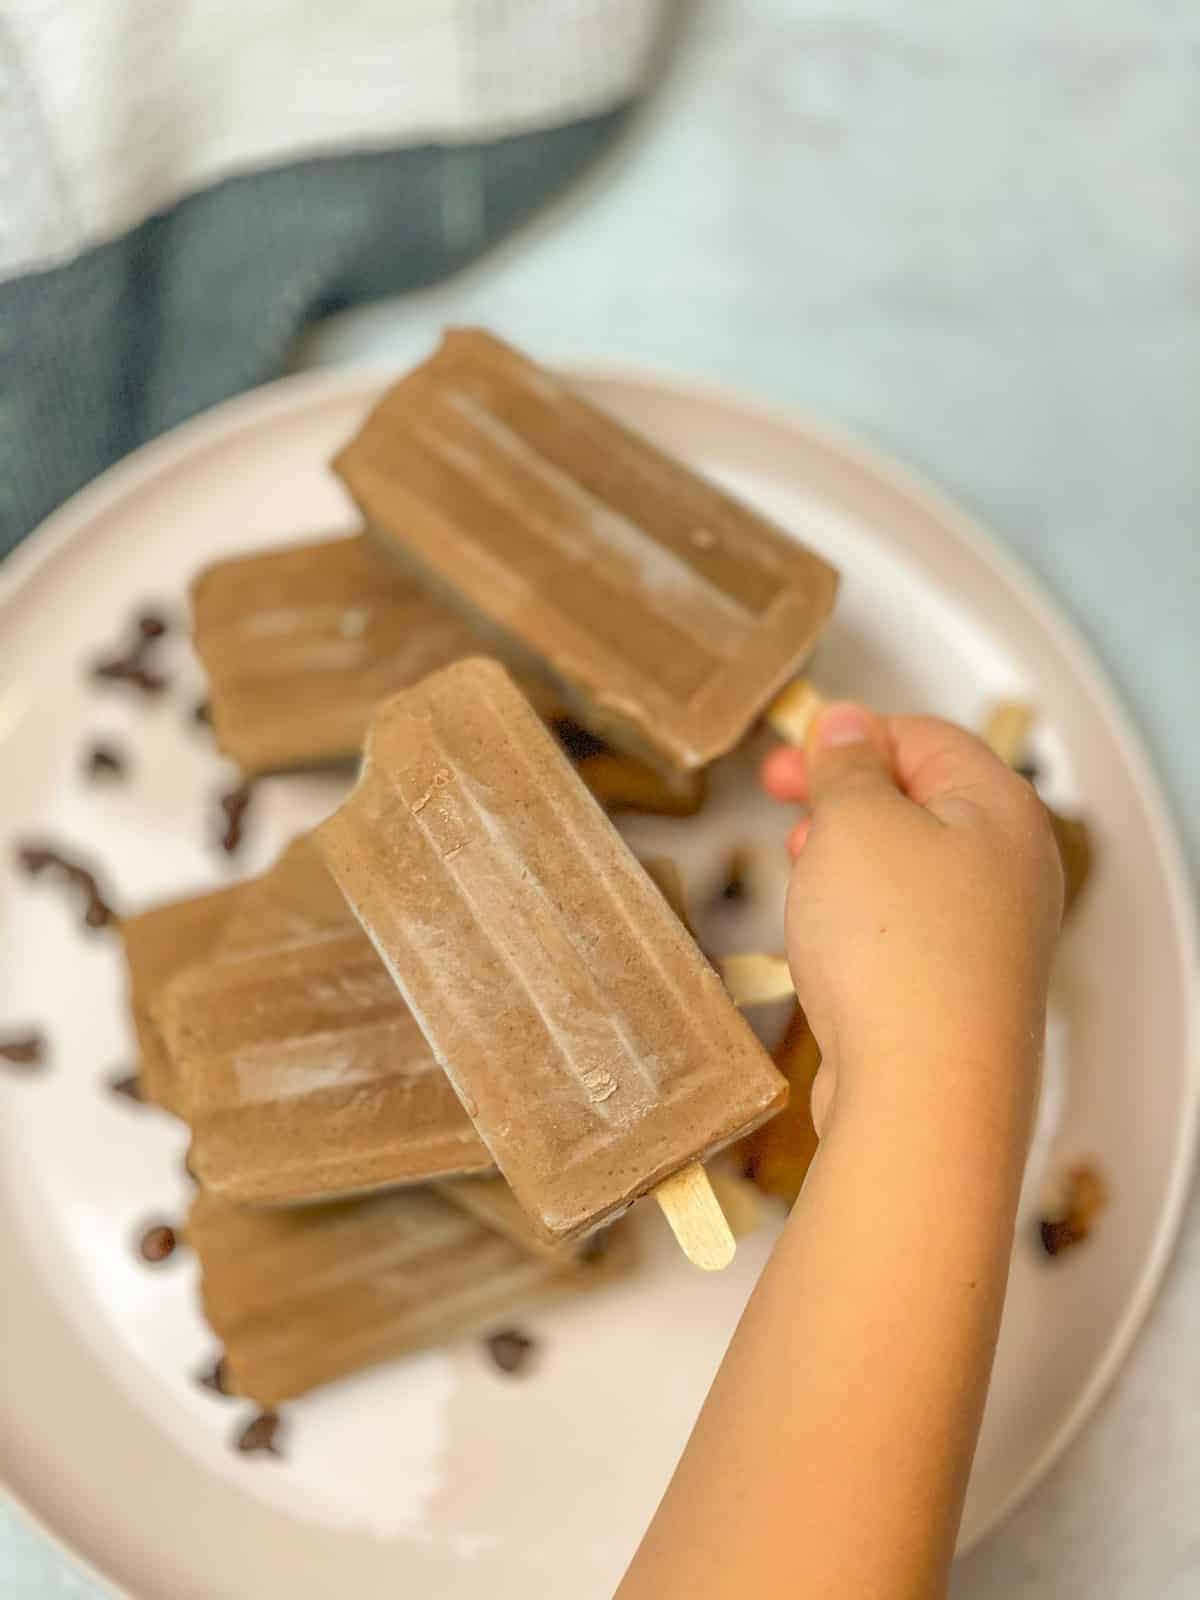 A woman is holding an iced chocolate fudgesicle and there is a dish full of other fudgesicles.